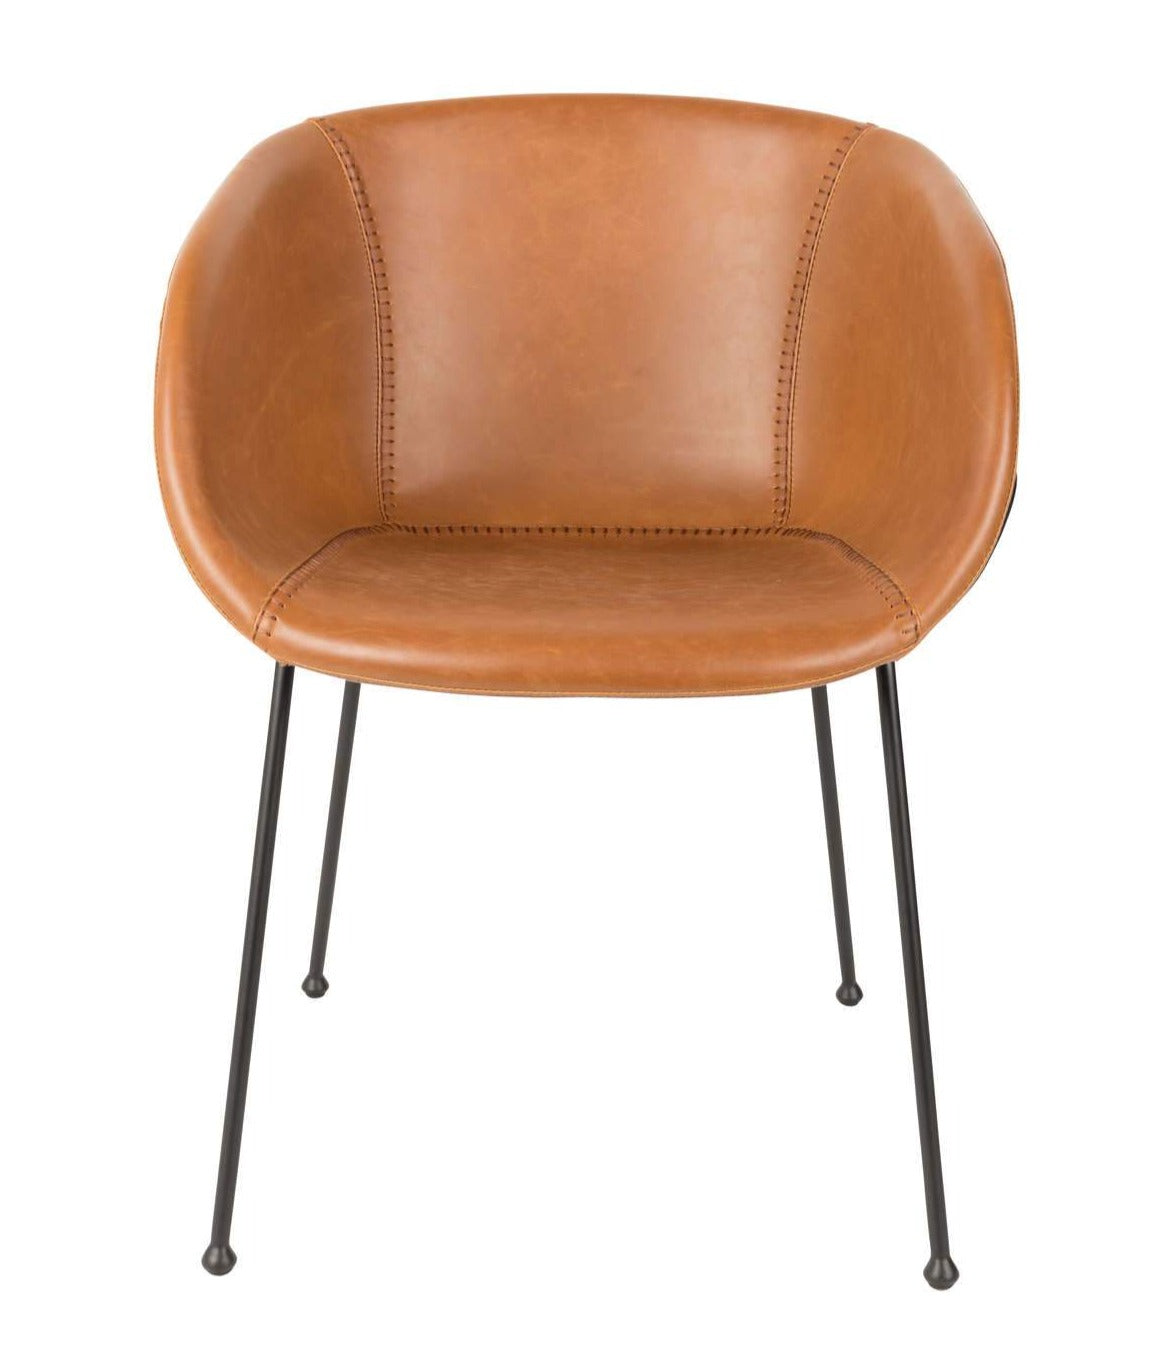 FESTON ecological leather armchair brown